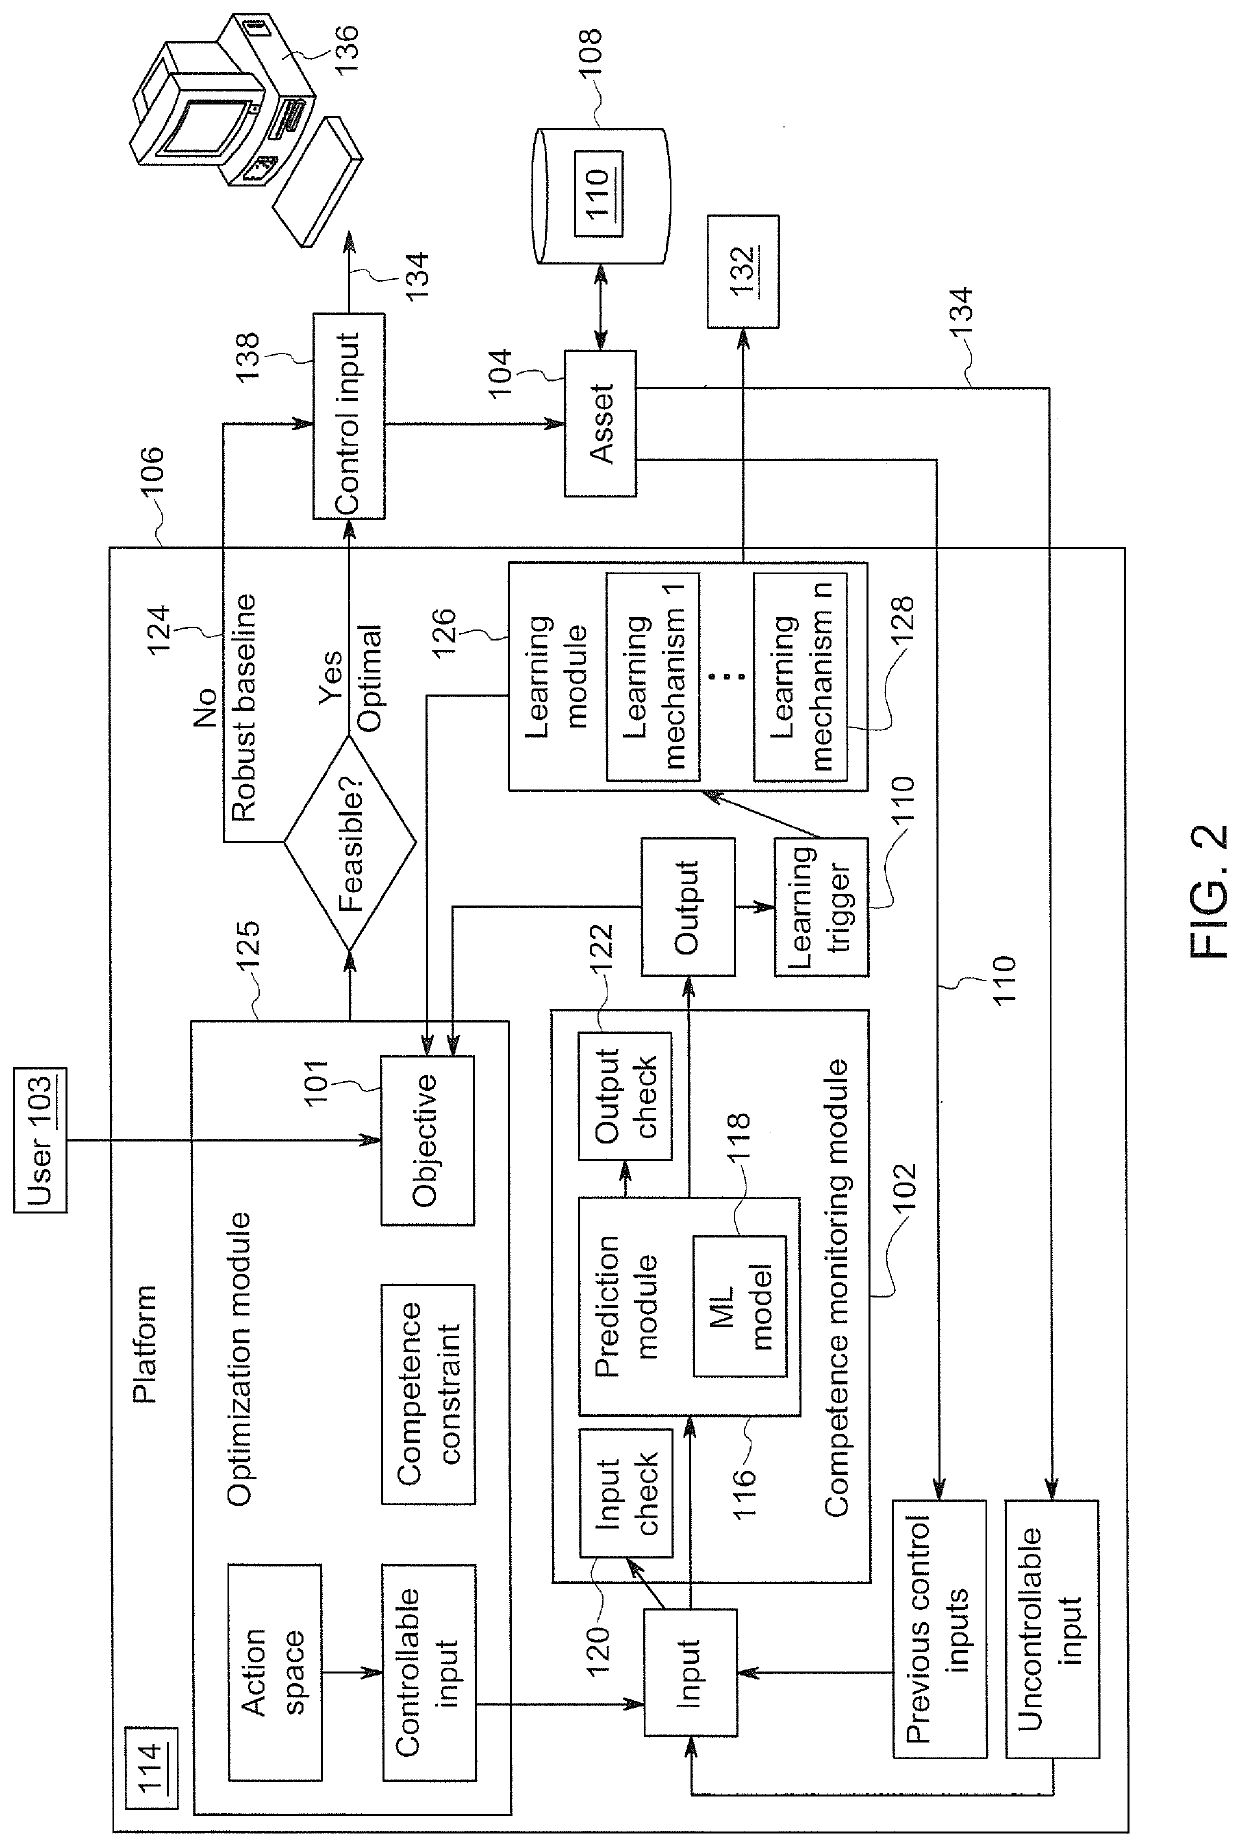 Method and system for competence monitoring and contiguous learning for control